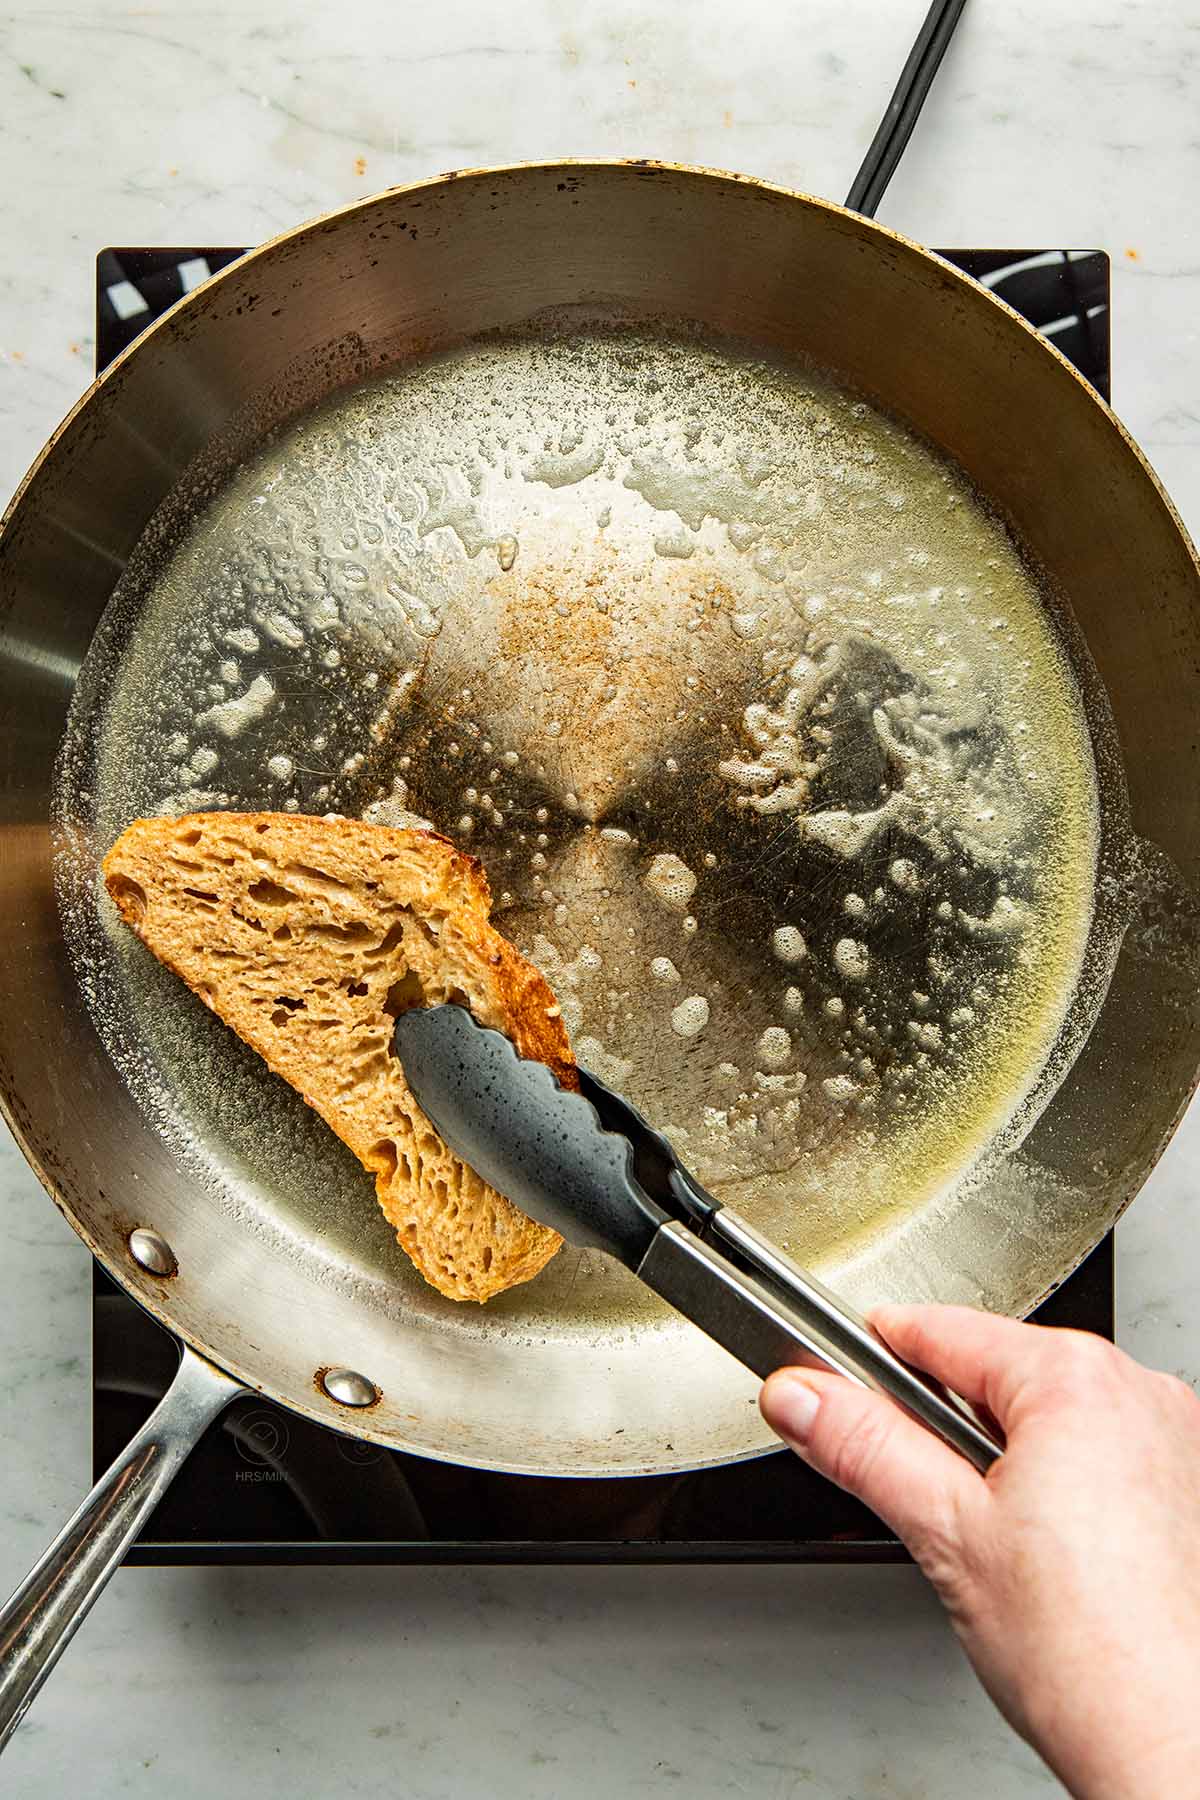 A hand using tongs to flip over a slice of bread in a frying pan.